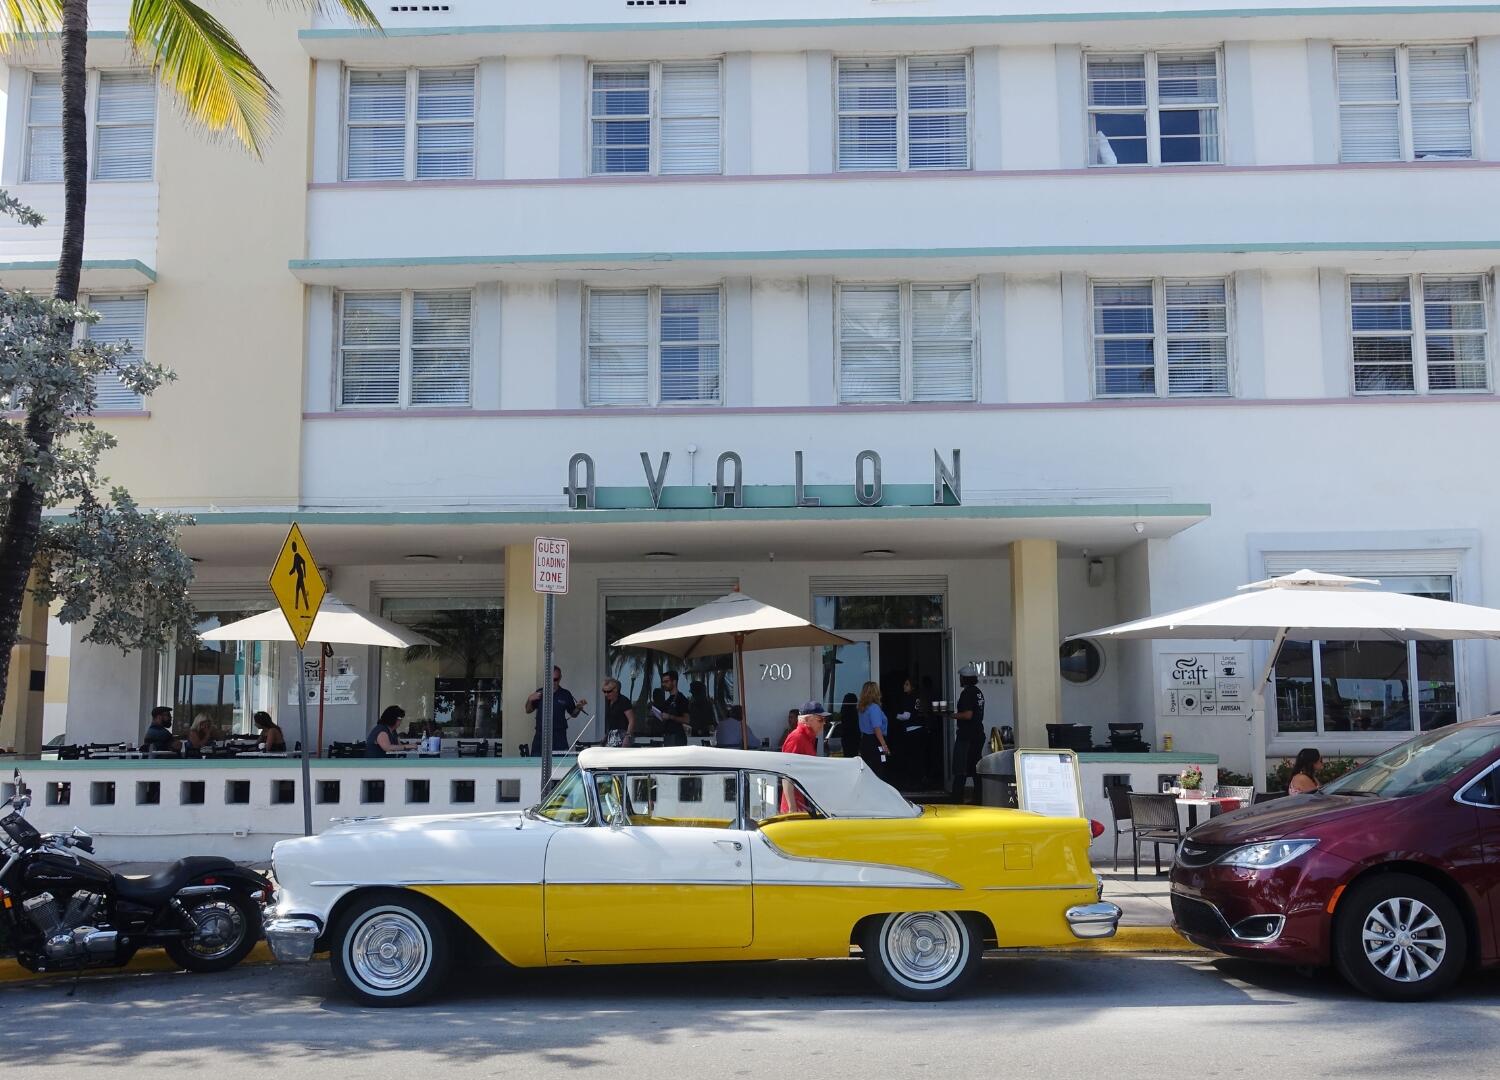 A classic car is parked in front of a hotel, offering a nostalgic touch to the Private Tours and Group Tours provided by the hotel.